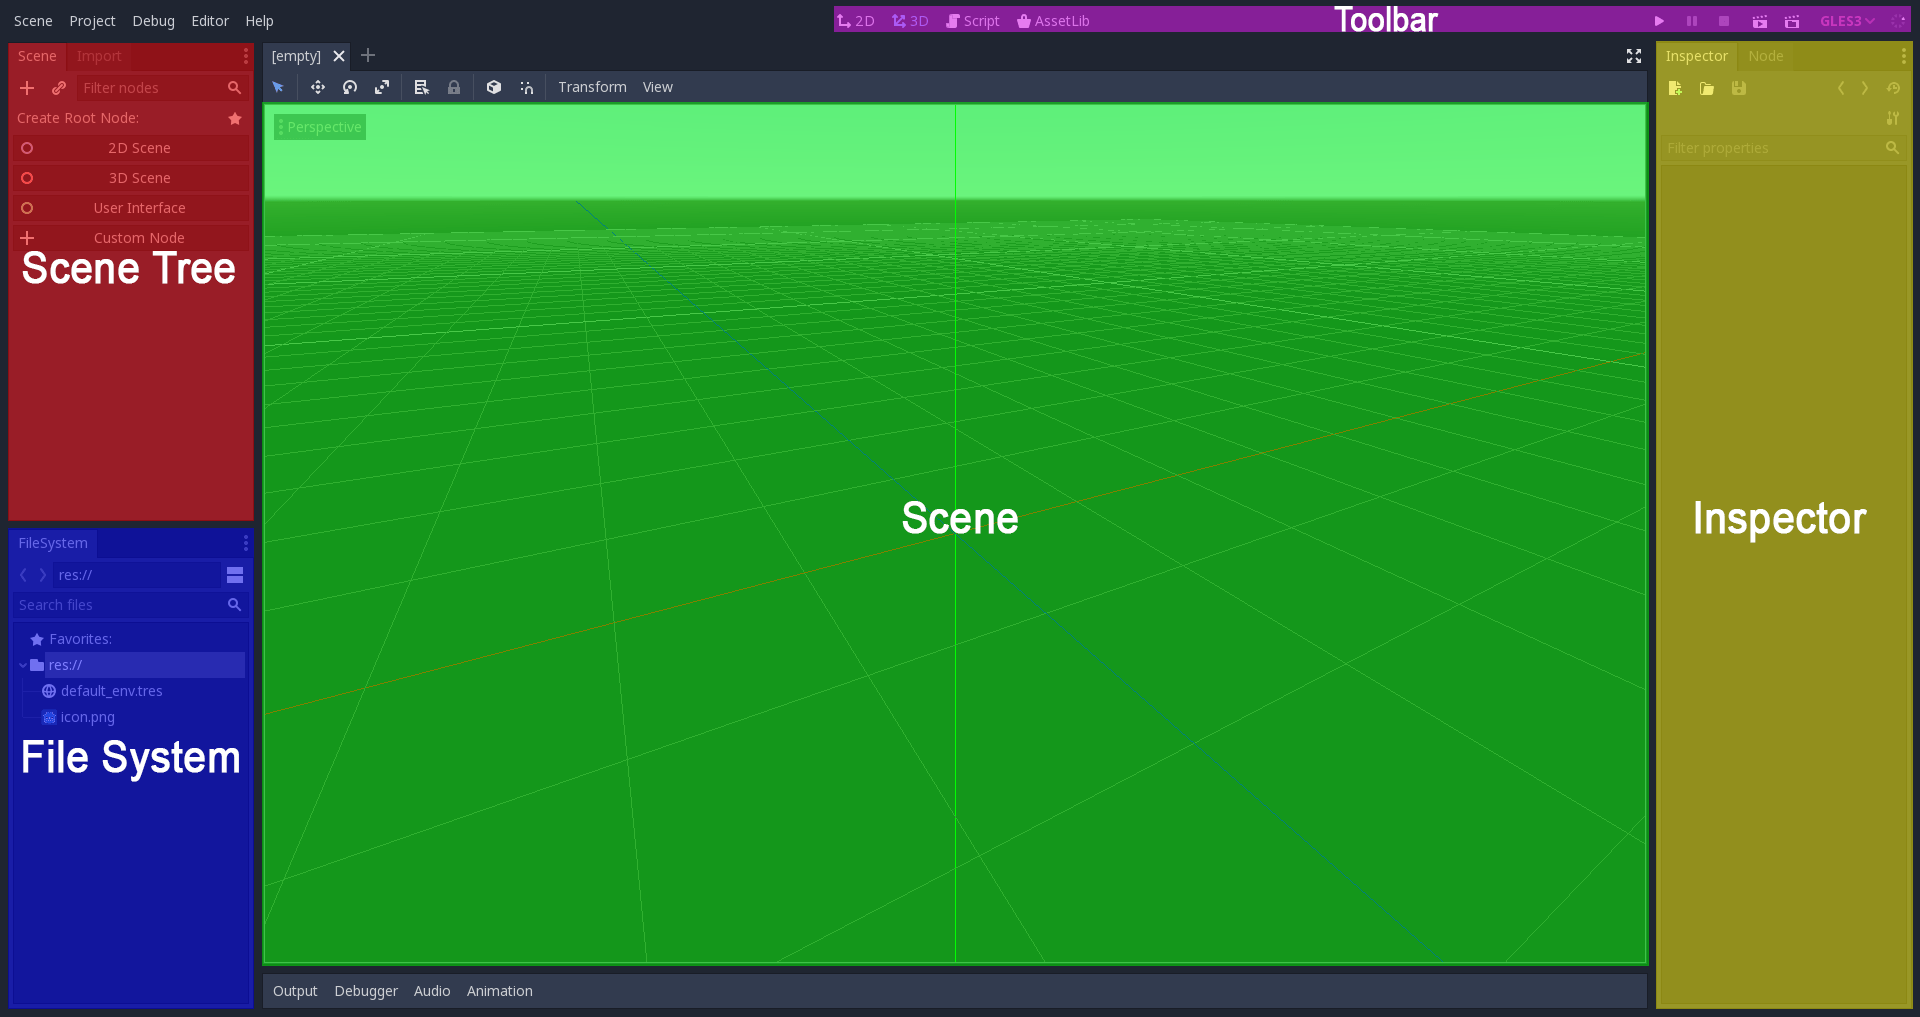 ../../_images/godot-gui-overlay.png